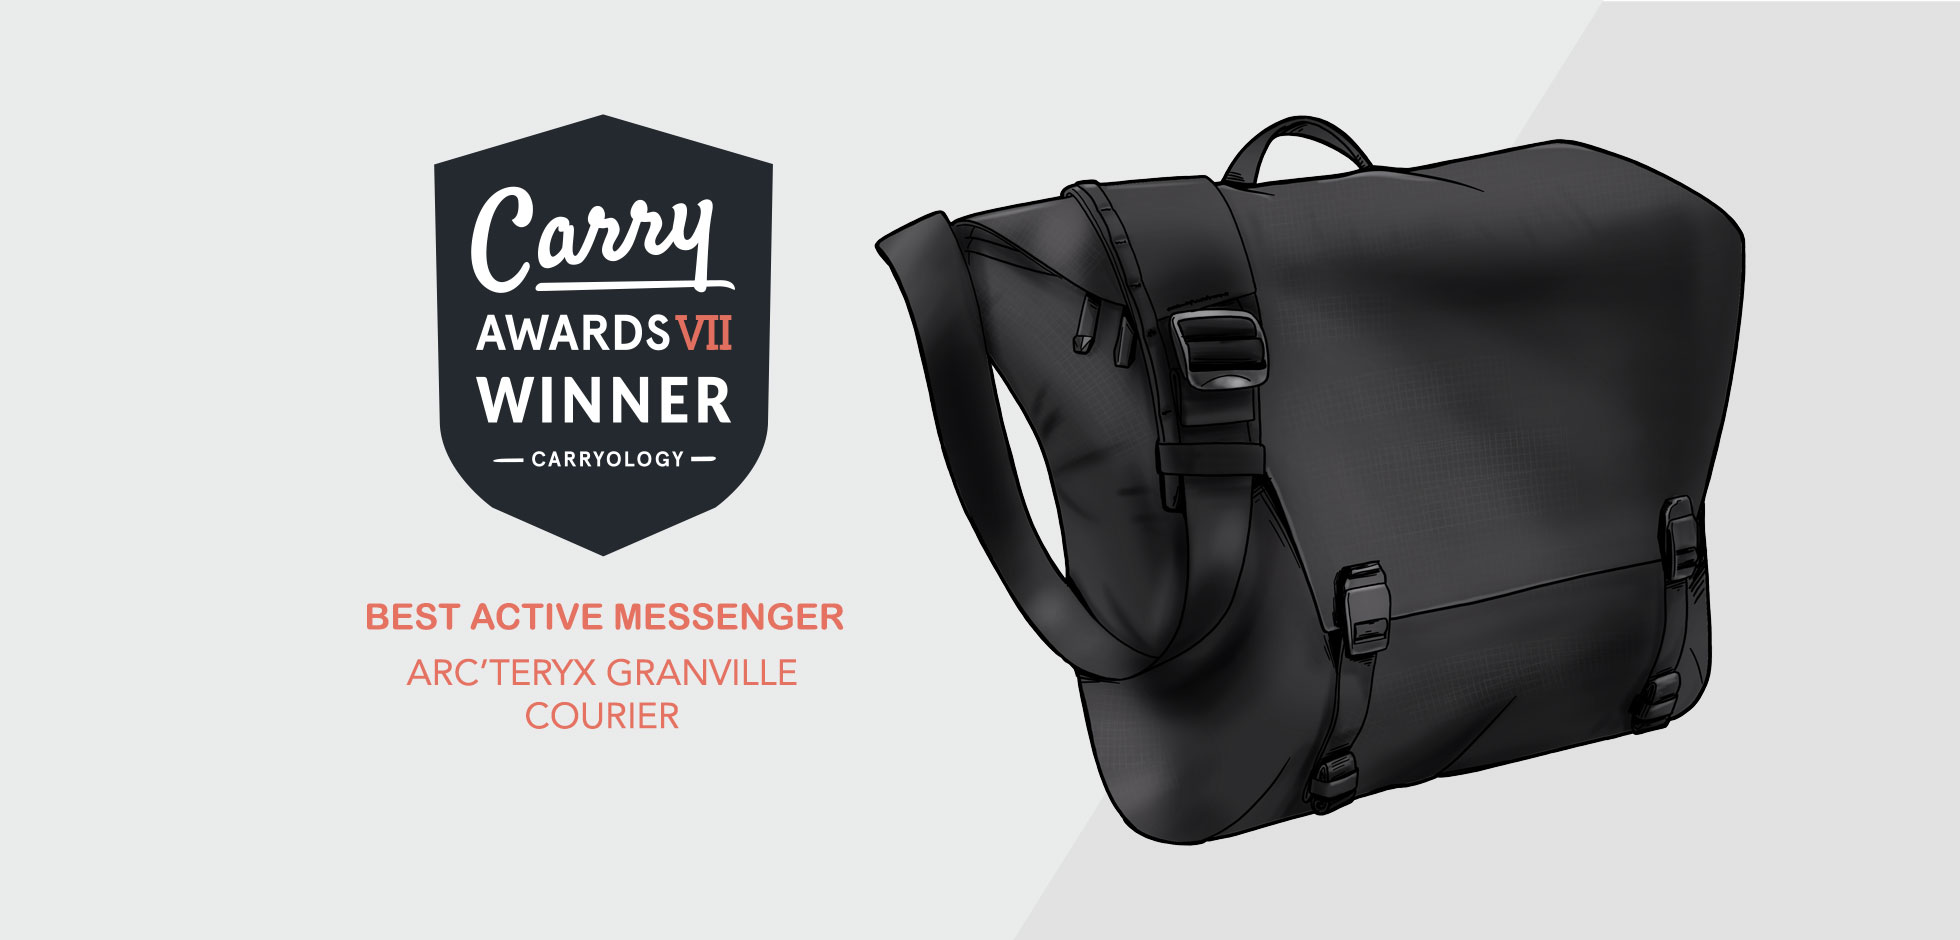 the best active messenger of 2019 is… arc'teryx granville courier